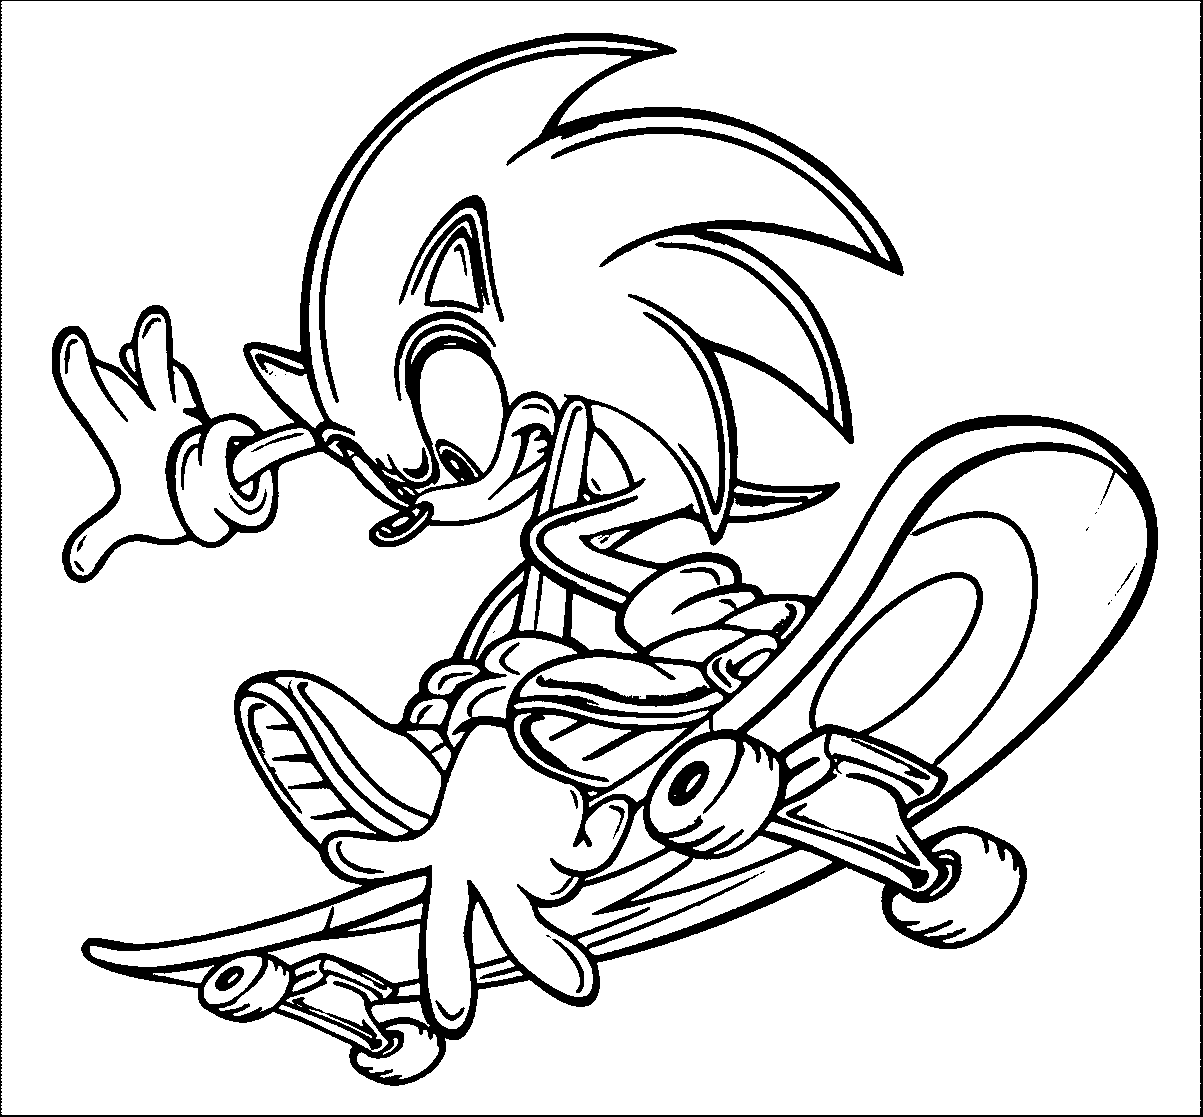 Skateboarding Sonic Coloring Page